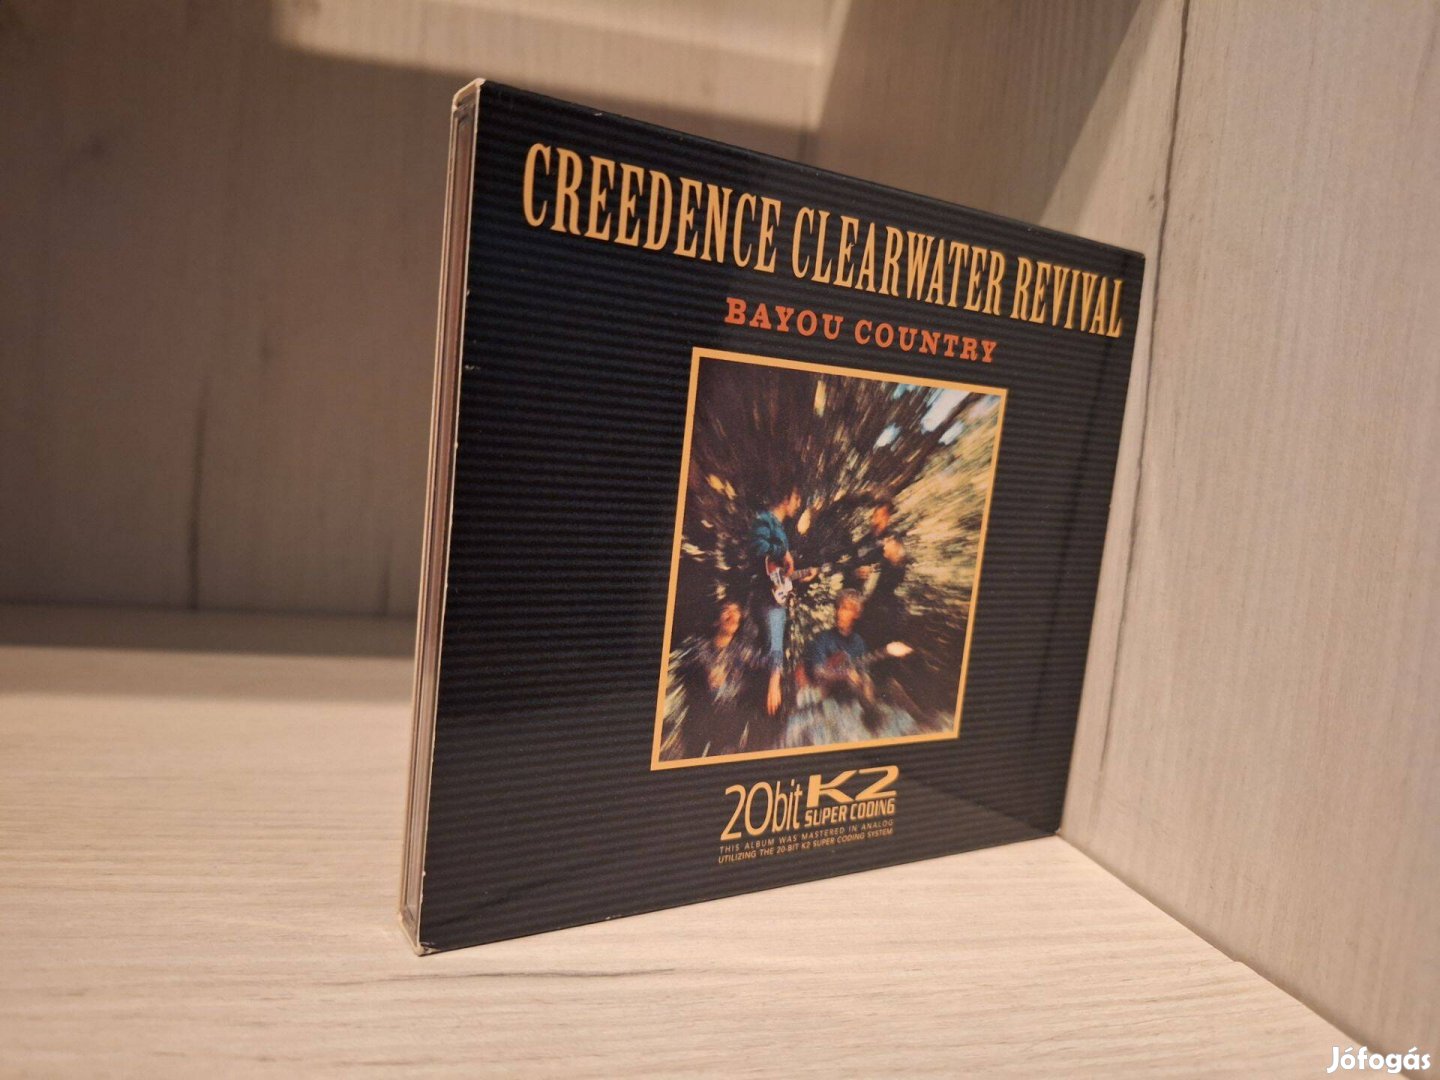 Creedence Clearwater Revival - Bayou Country CD Remastered